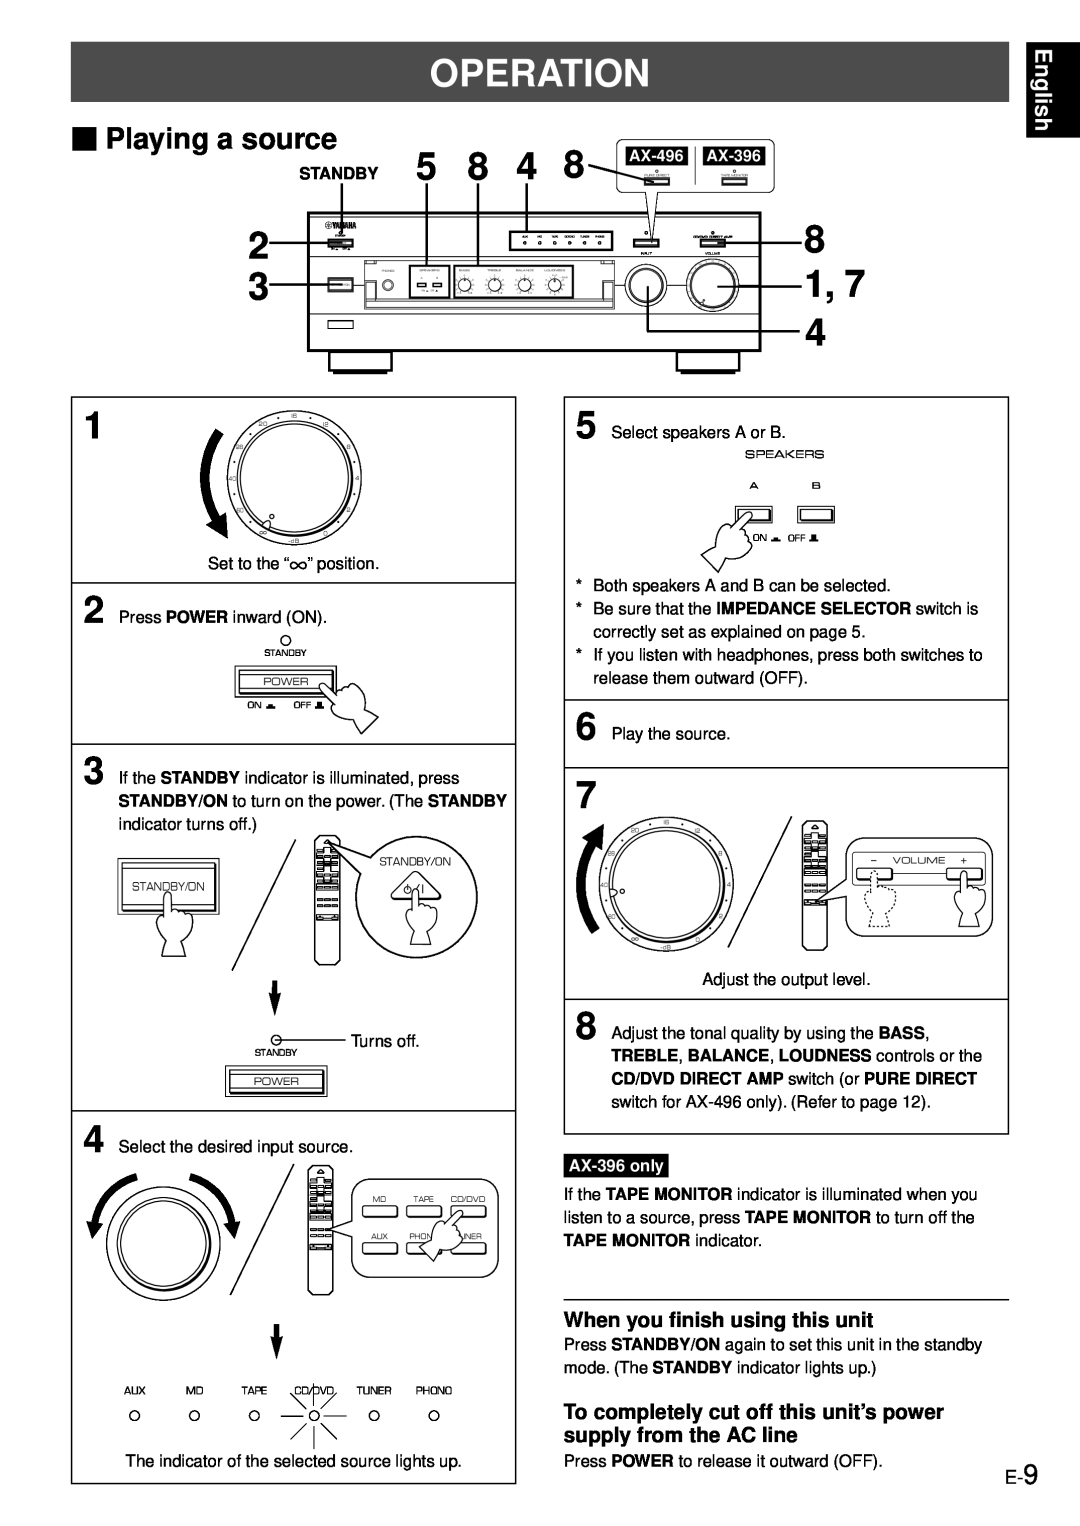 Yamaha AX-496/396 owner manual Operation, Playing a source, When you finish using this unit, English, Standby, AX-396only 